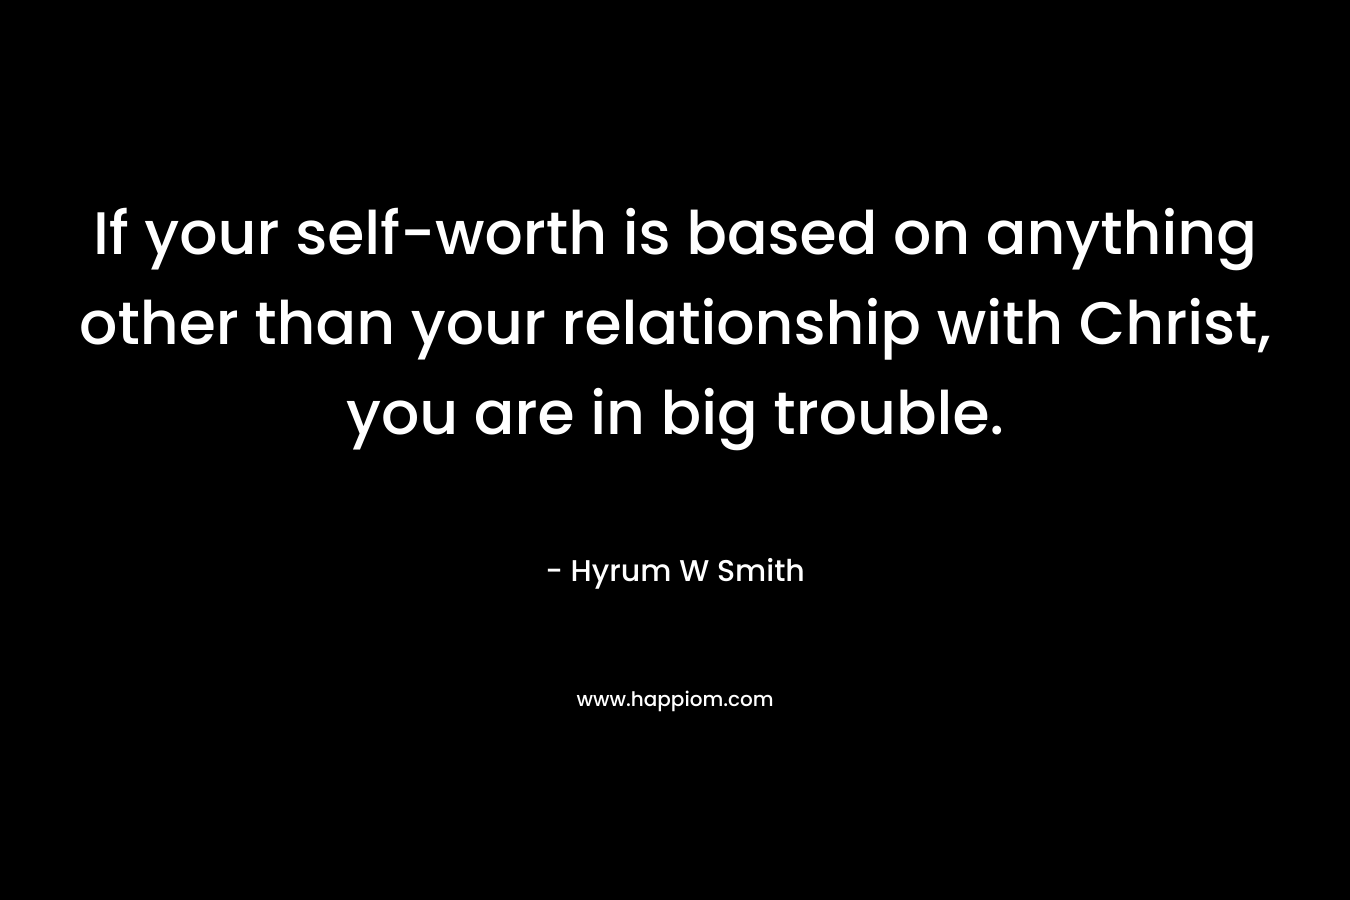 If your self-worth is based on anything other than your relationship with Christ, you are in big trouble.